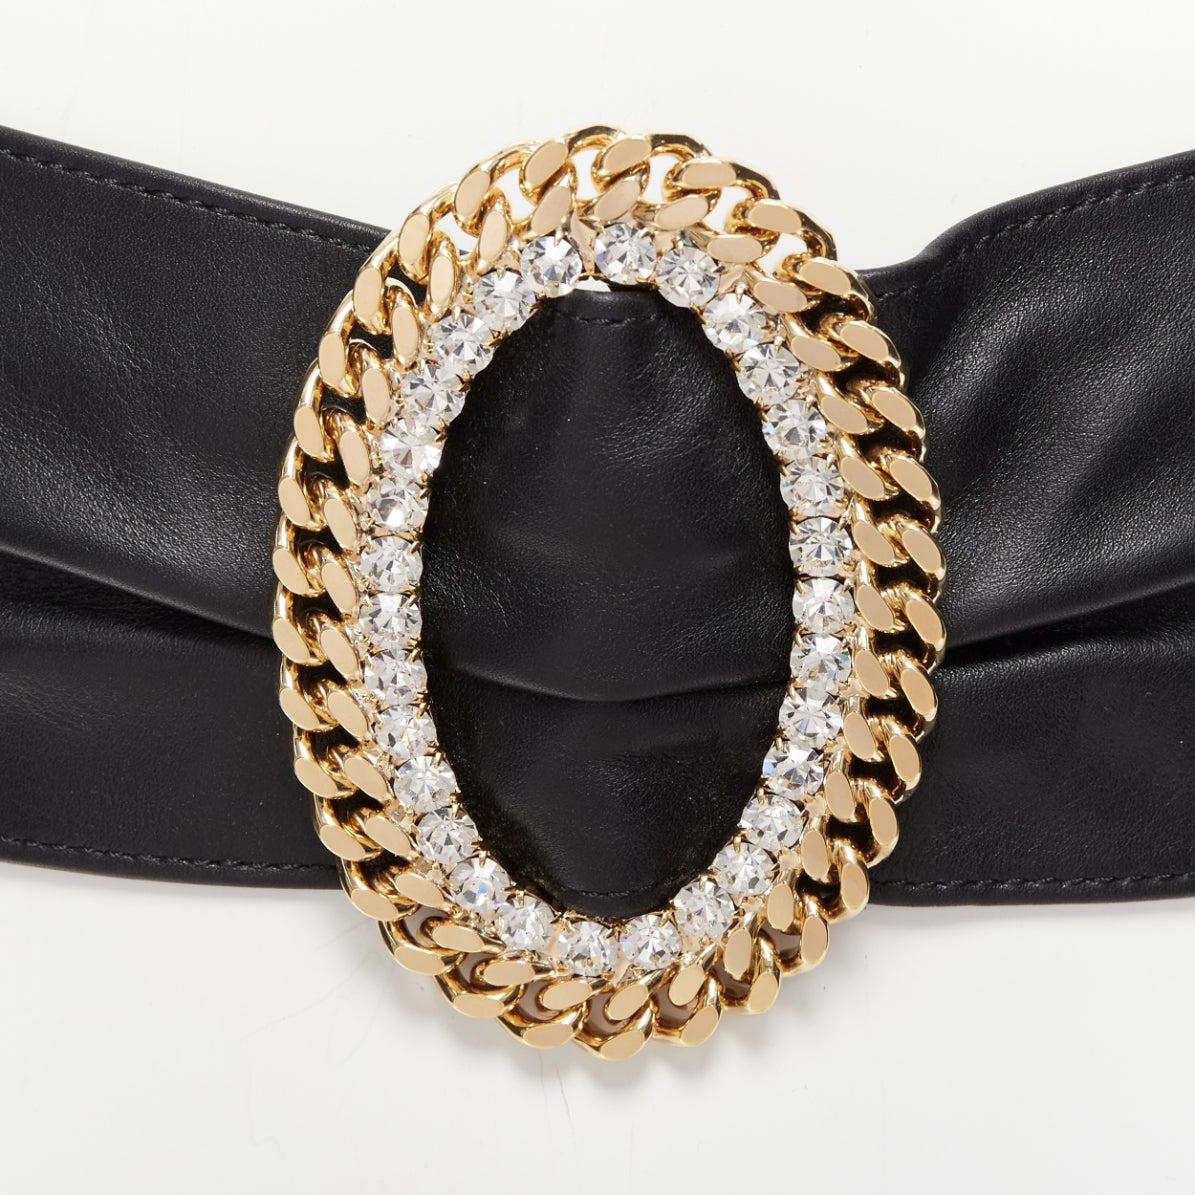 ALESSANDRA RICH rhinestone crystal gold chain oval buckle black leather belt S
Reference: AAWC/A01192
Brand: Alessandra Rich
Material: Leather, Metal
Color: Black, Gold
Pattern: Solid
Closure: Belt
Lining: Black Leather
Extra Details: Belt with gold